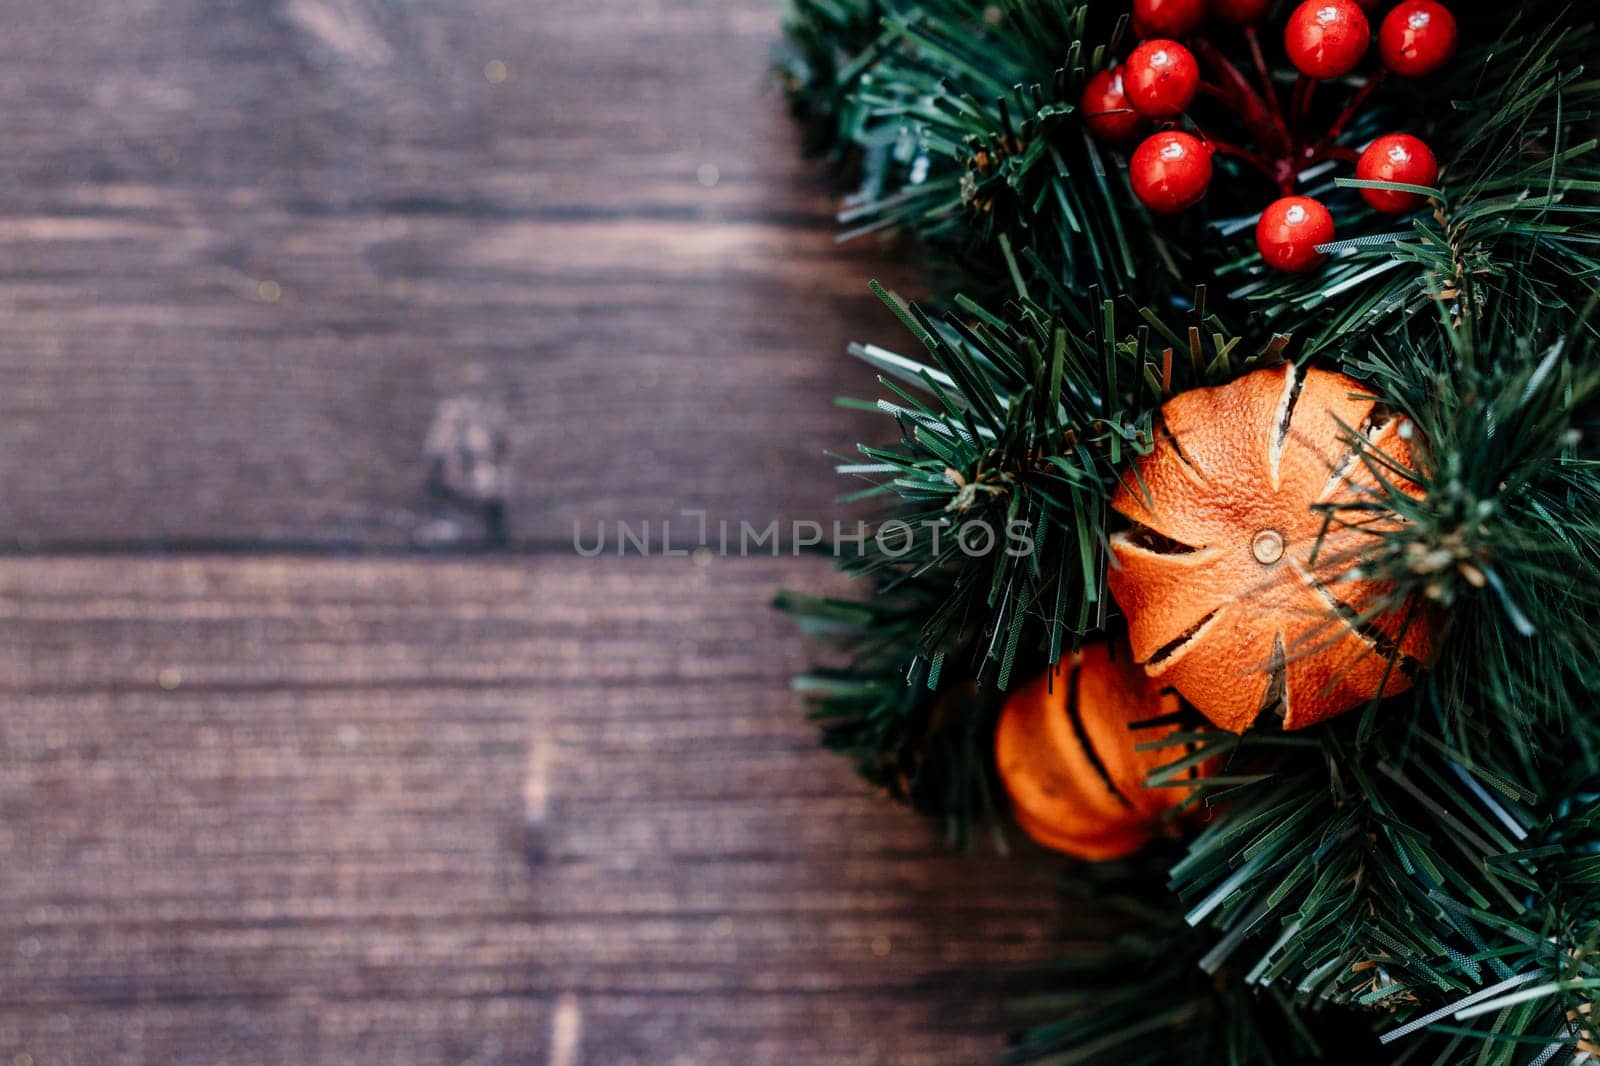 christmas background pine tree with dried tangerines wooden background. The combination of the pine tree, ornaments, and greenery creates a classic and cozy setting